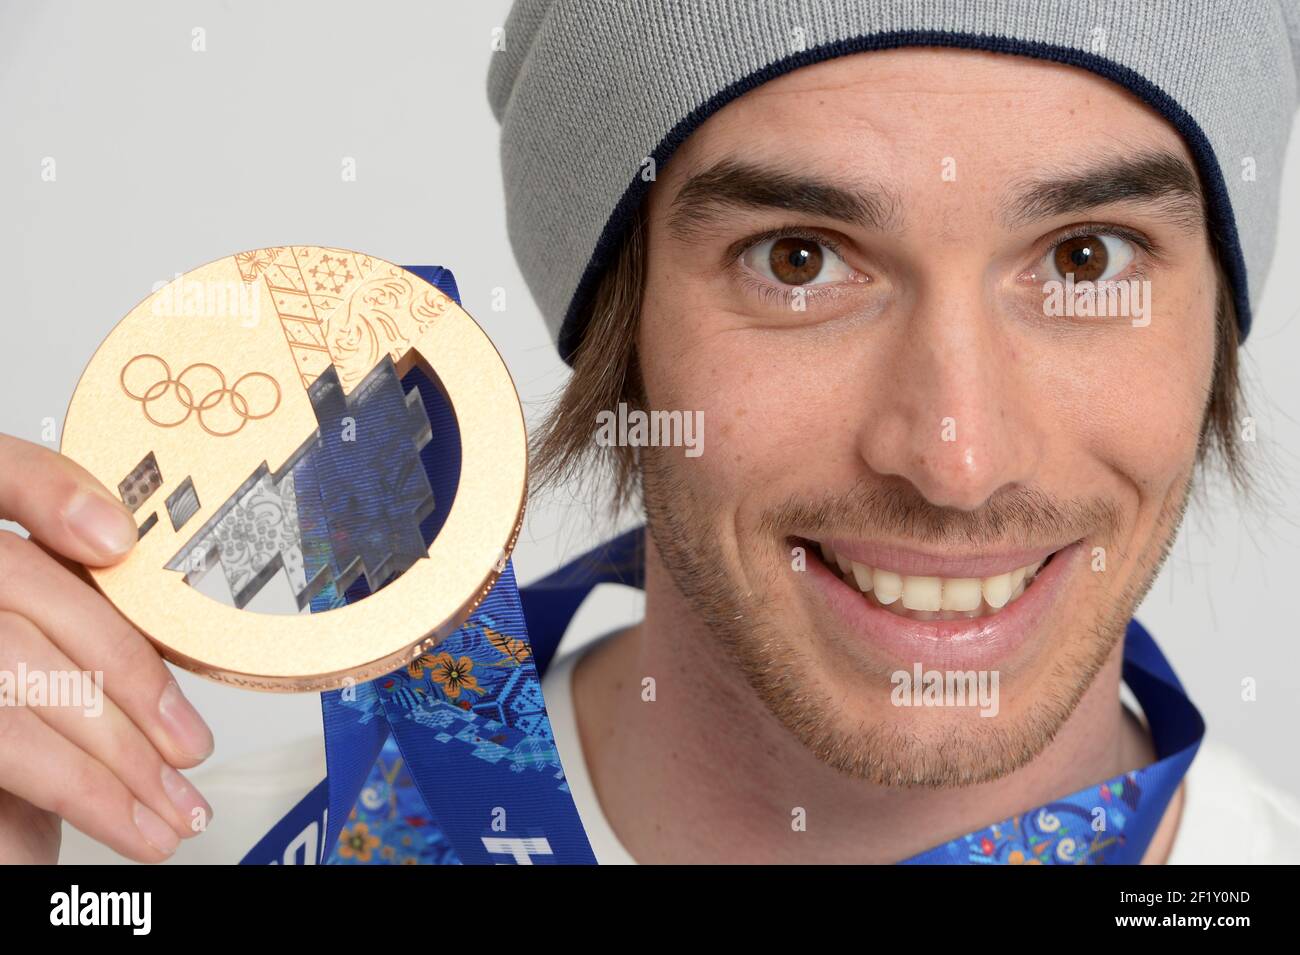 Portrait Of Kevin Rolland From France Bronze Medal Of Men S Freestyle Skiing Halfpipe During The Xxii